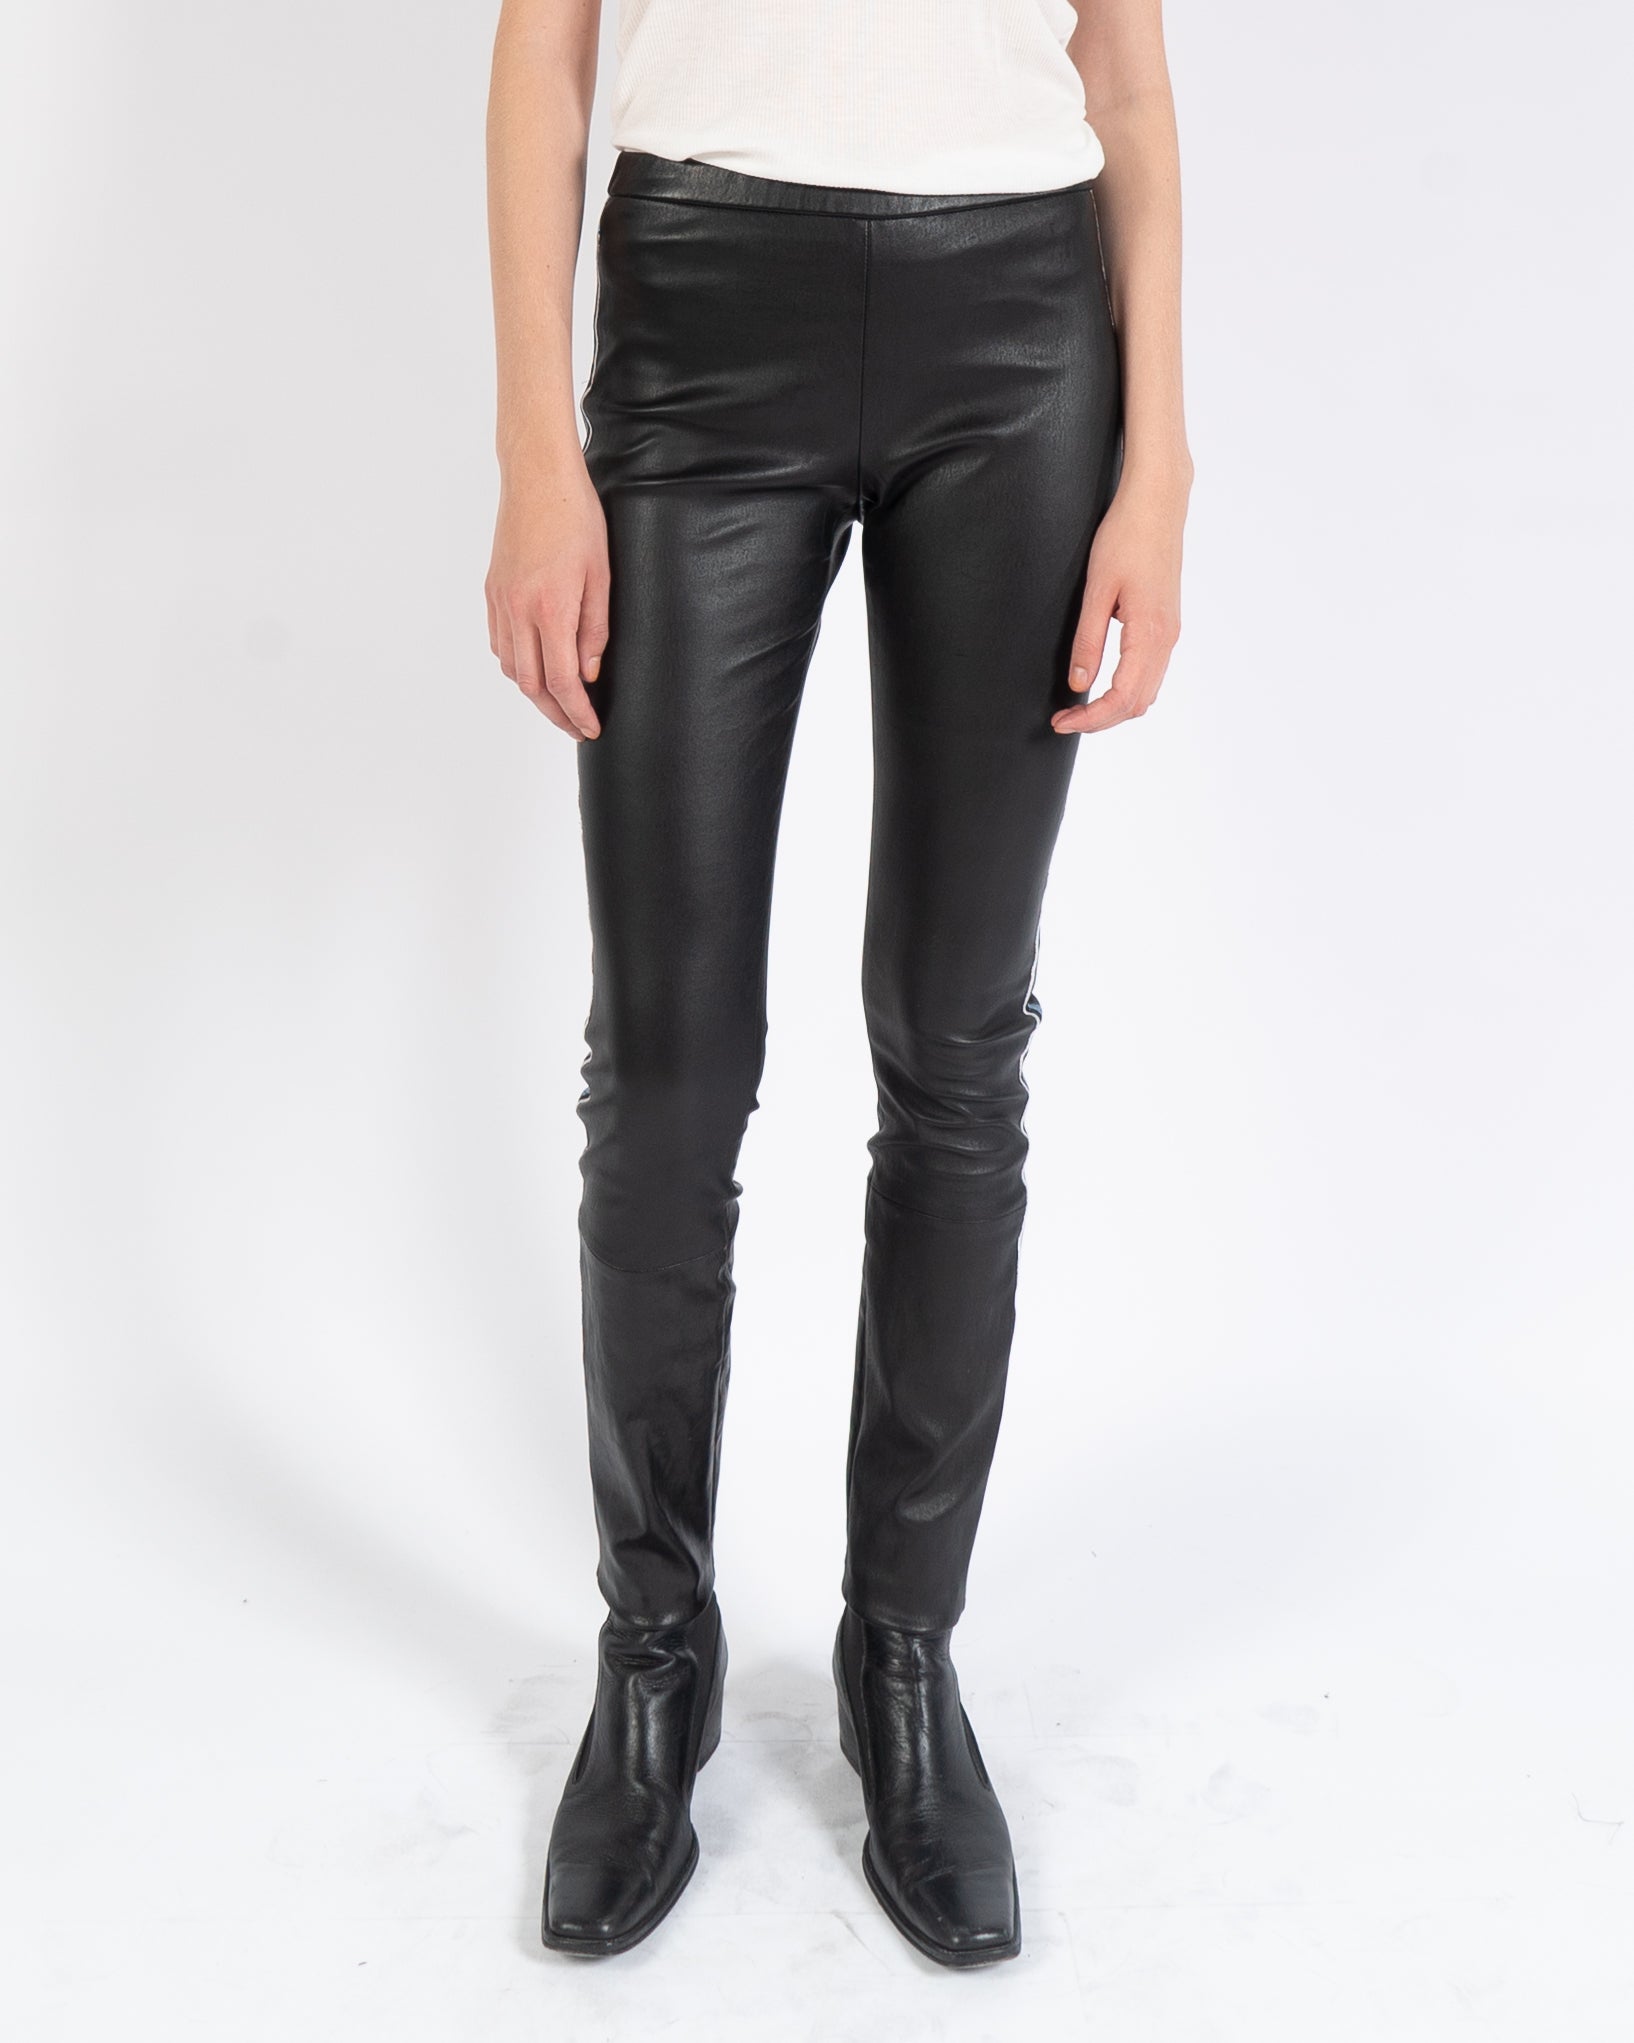 SS20 Embroidered Leather Leggings